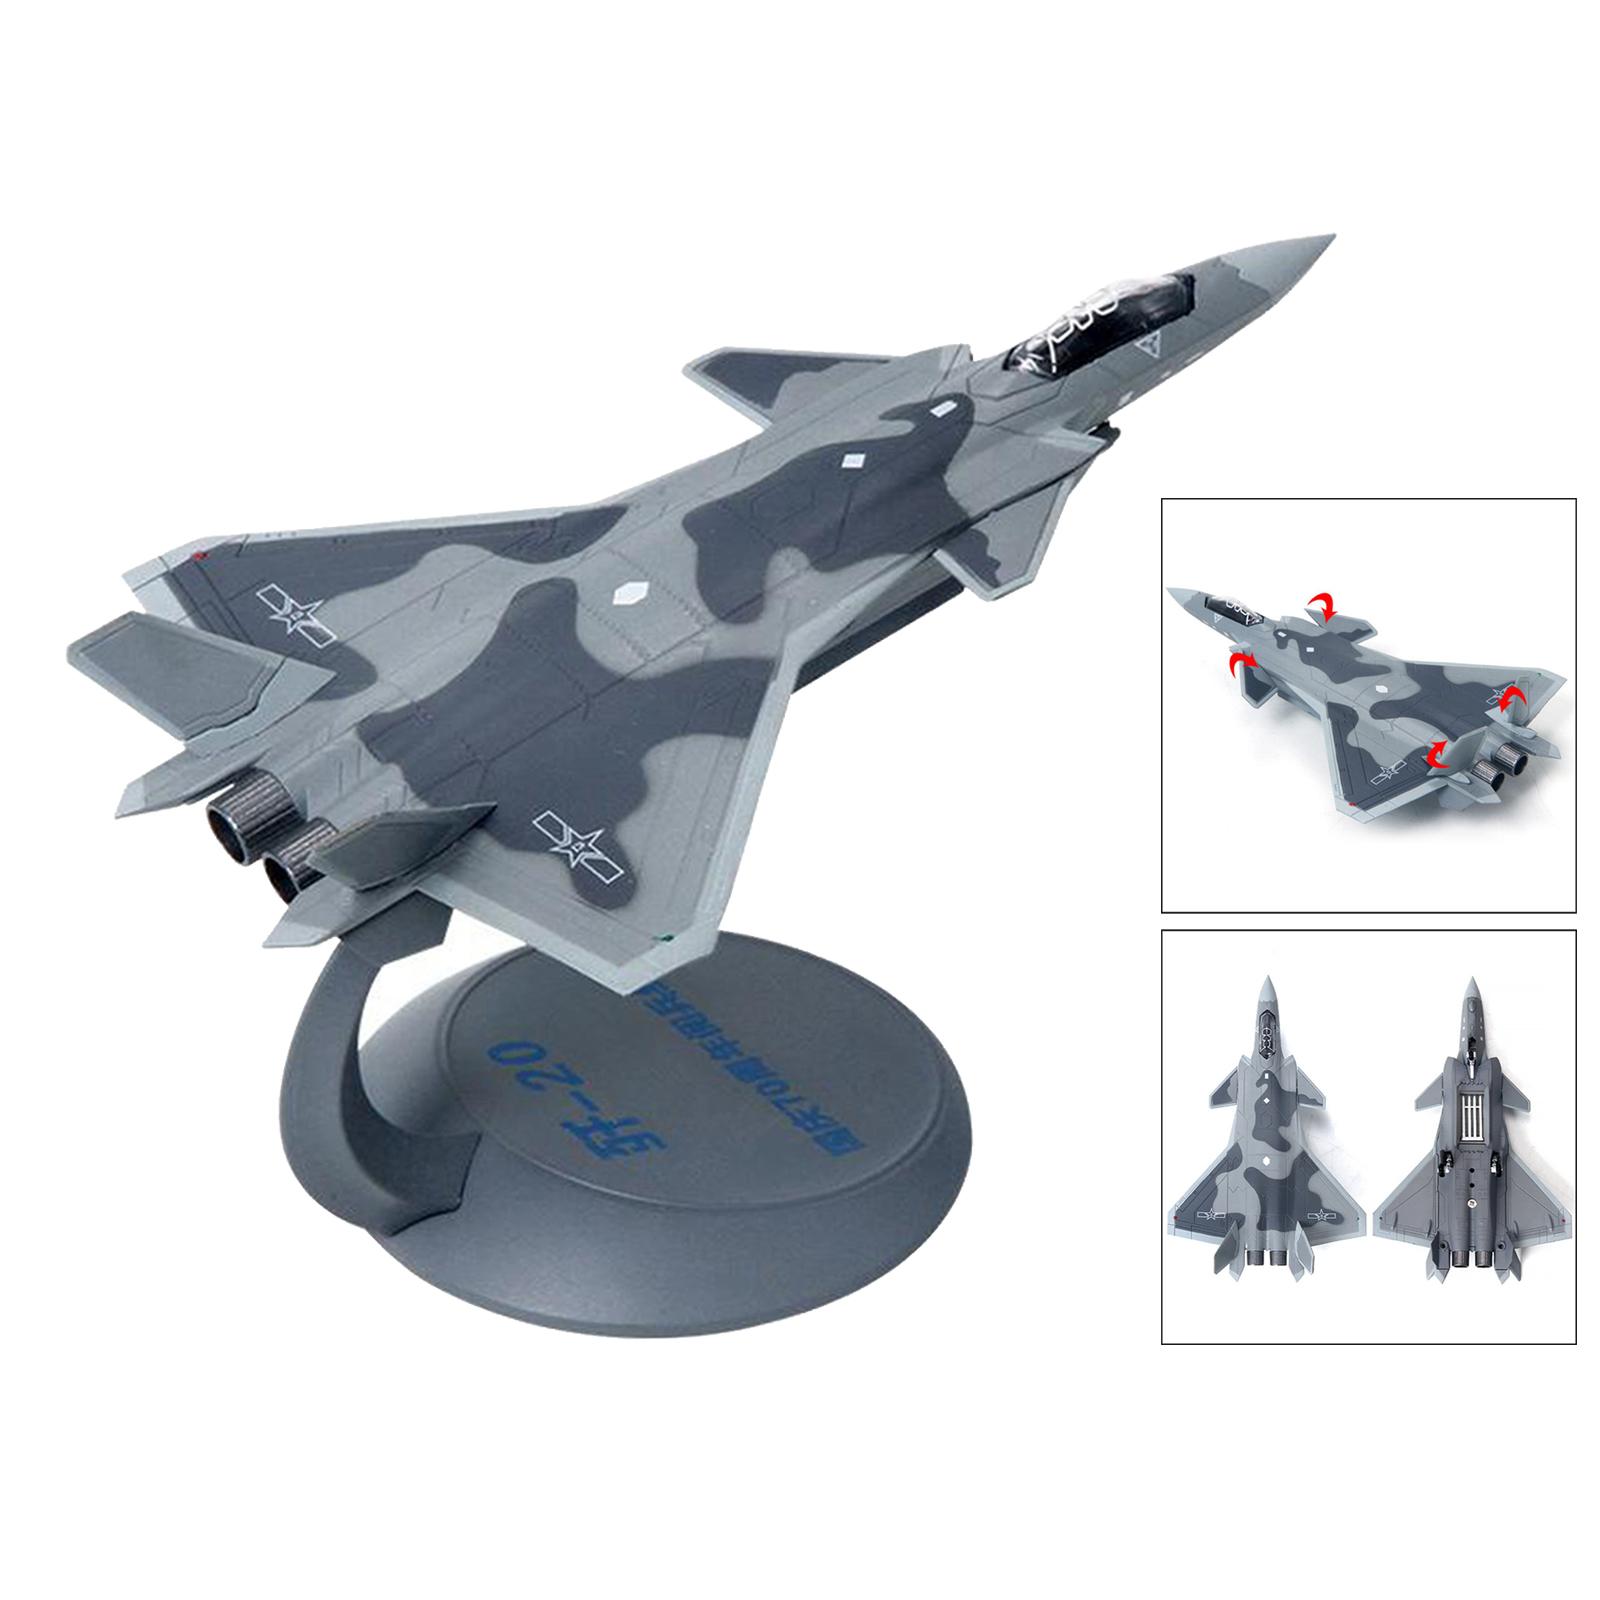 1:144th Scale Metal Airplane J20 Aircraft Alloy ABS Fighter Plane Model